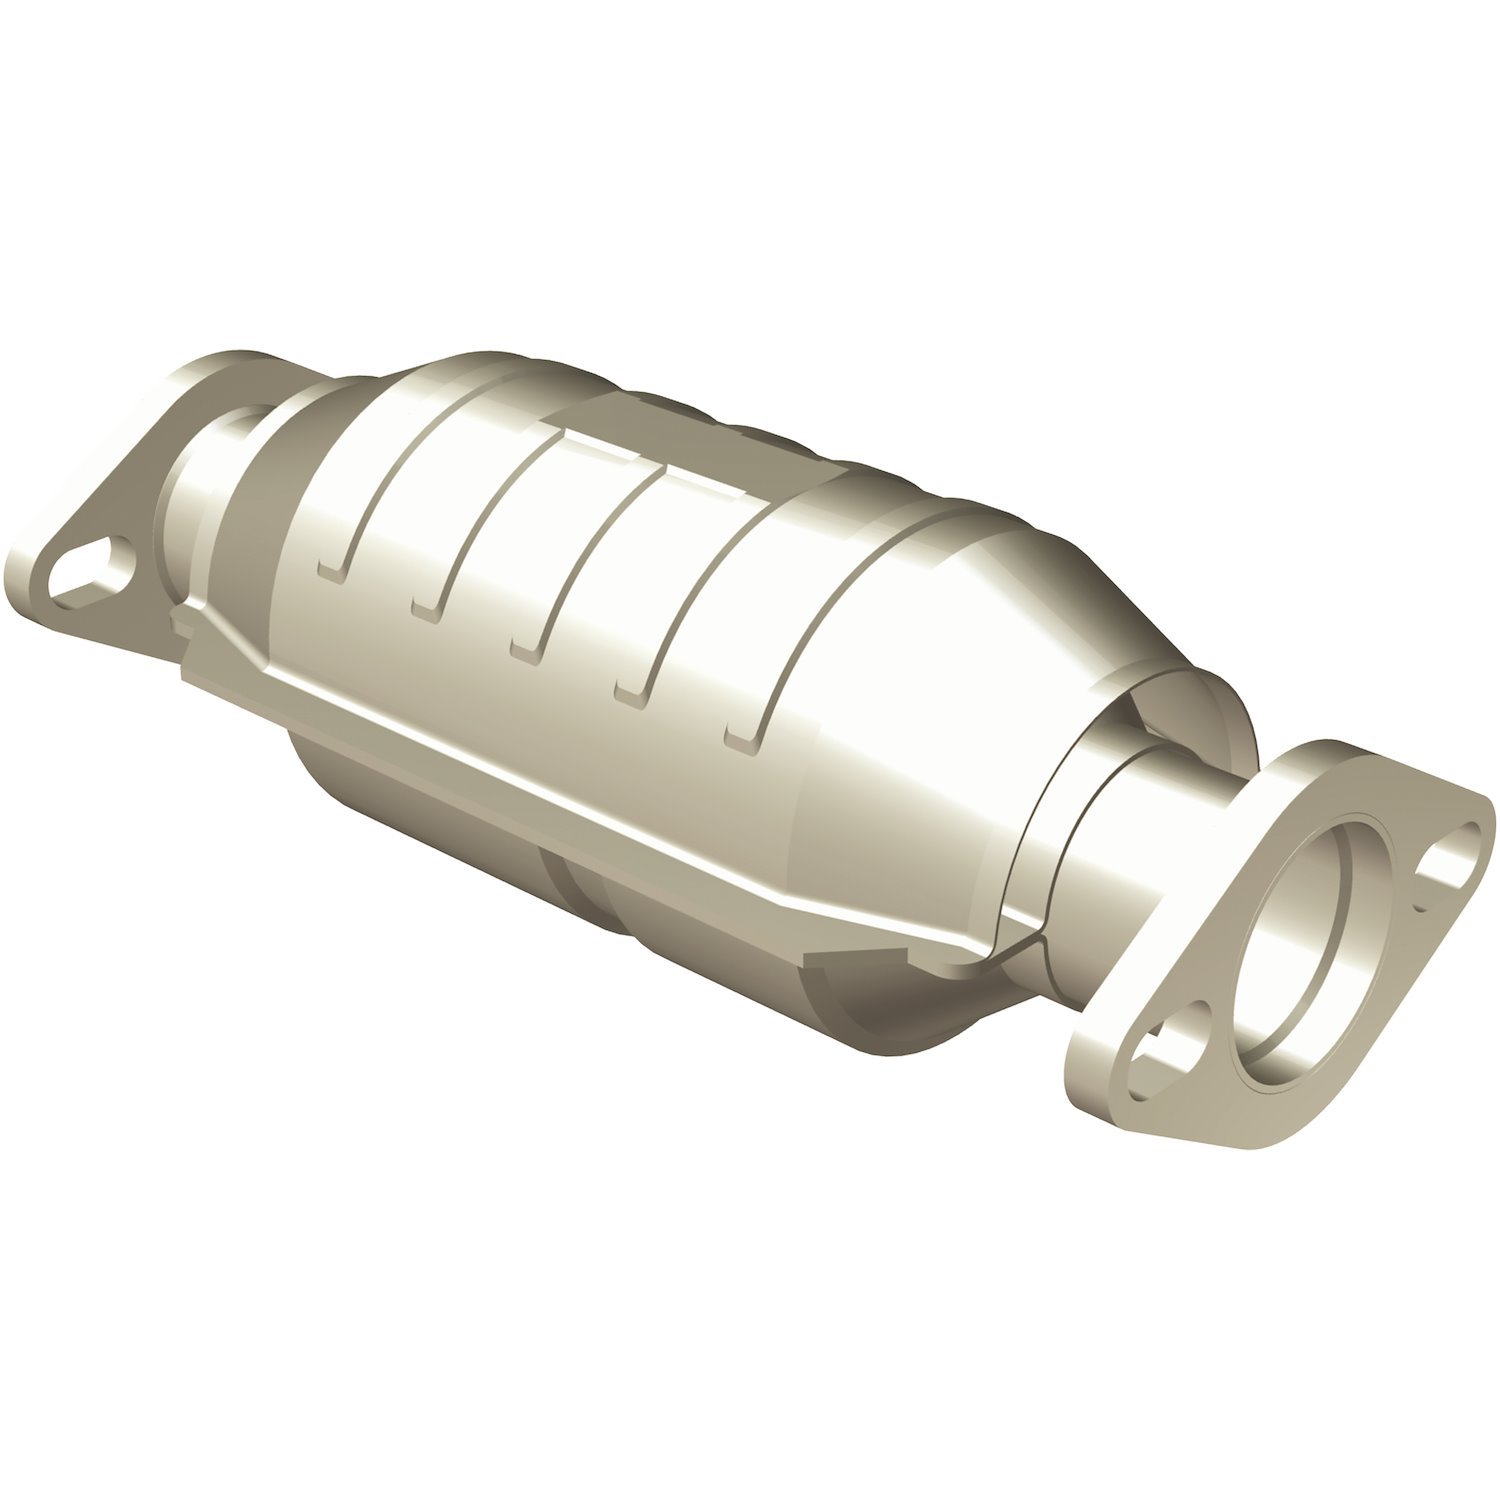 Direct-Fit Catalytic Converter 1995-1998 for Nissan 240SX 2.4L